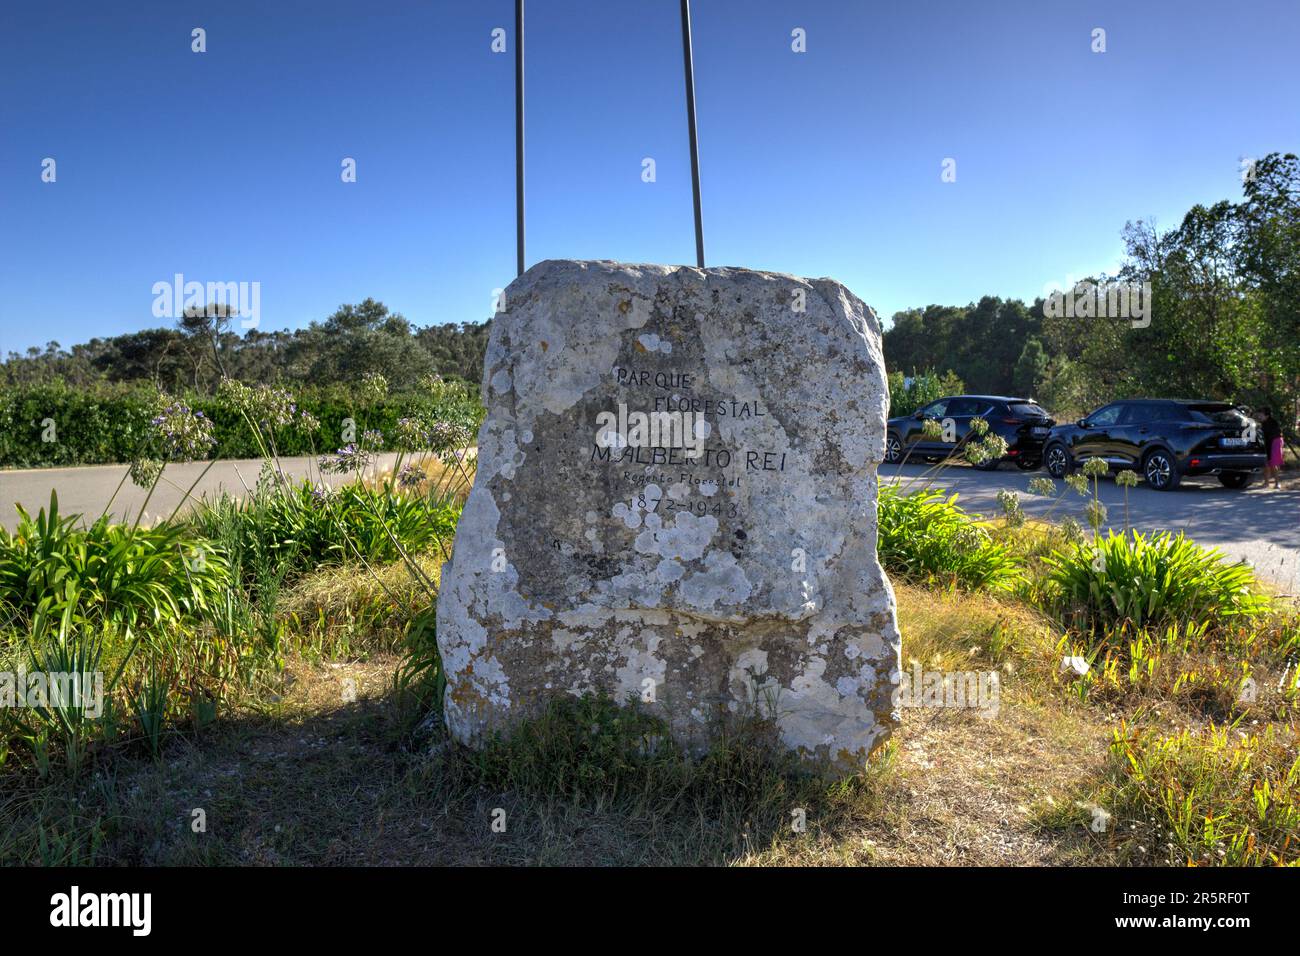 Quiaios, Portugal - August 14, 2022: Close up of stone memorial located on viewing point within natual parkland overlooking Quiaios by the sea Stock Photo